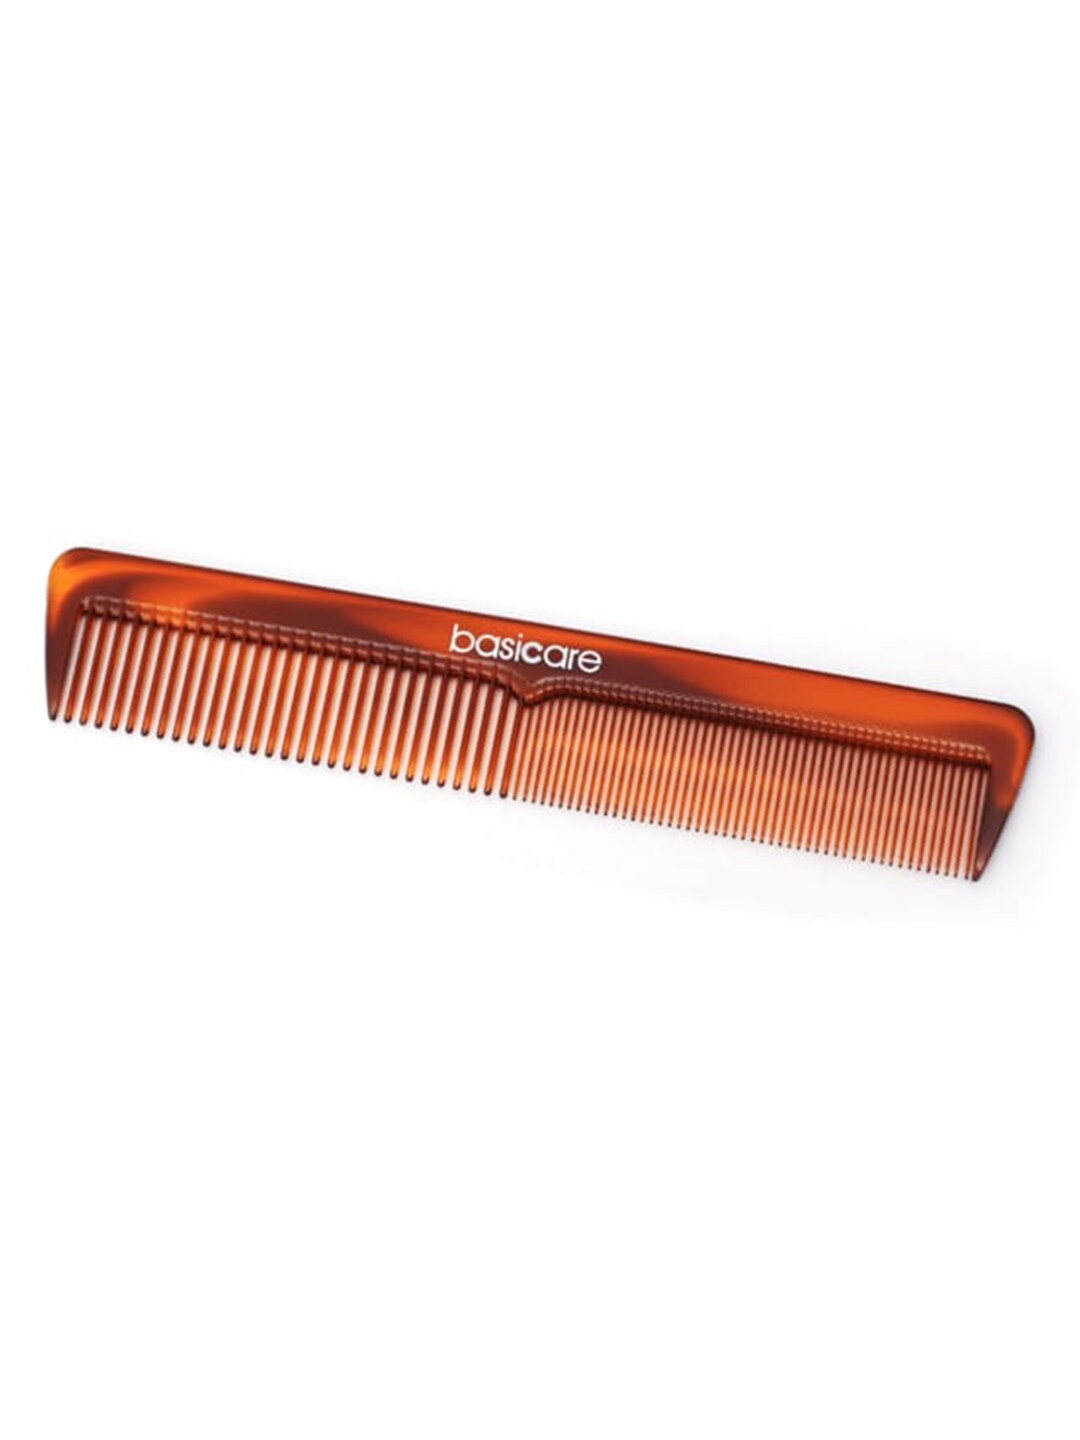 basicare Brown Styling Comb Price in India